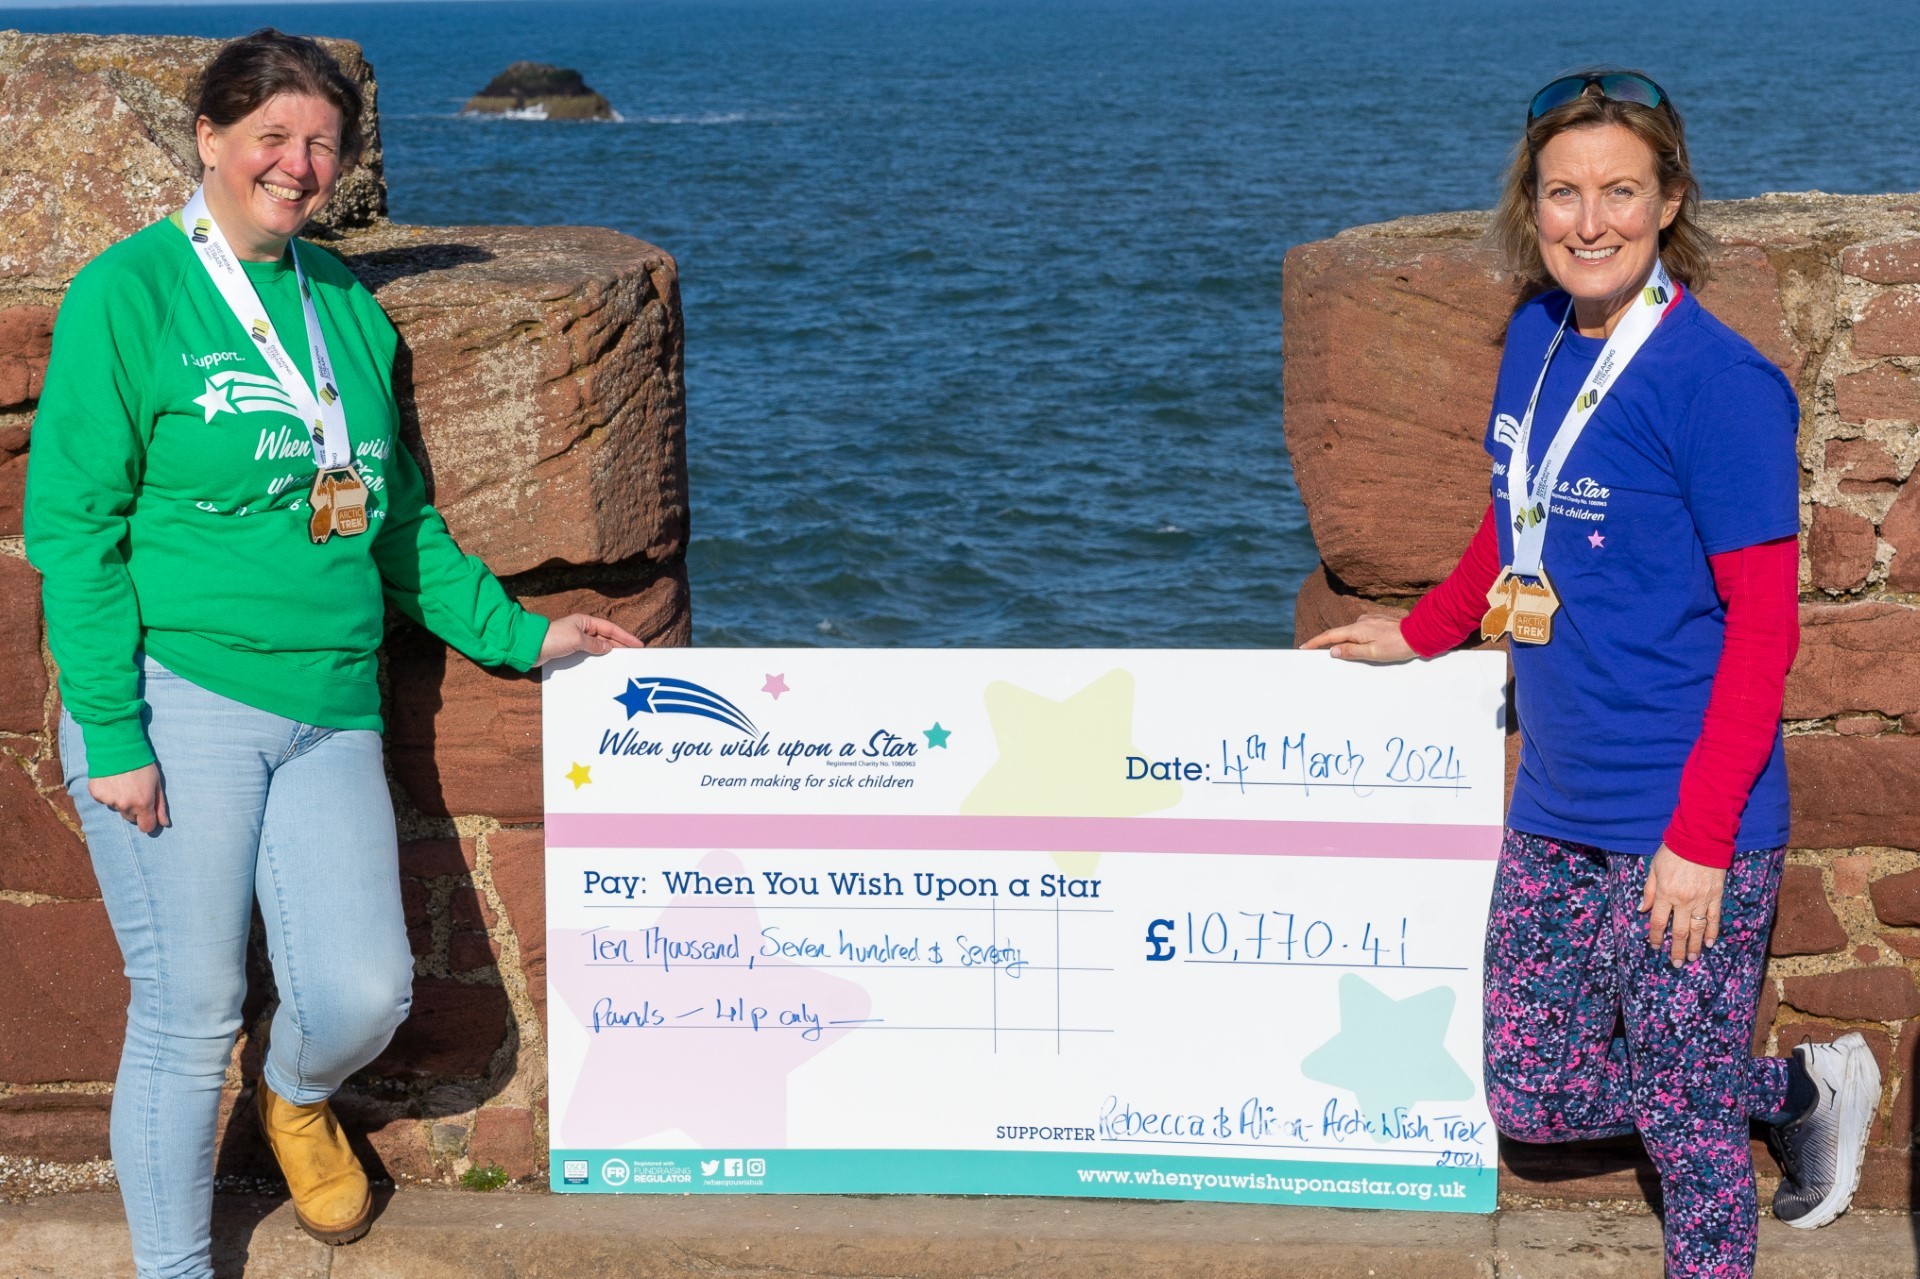 Becs Miller (right) and Alison Wilson have raised more than £10,000 for When You Wish Upon a Star. Image: Alasdair Ross Photography